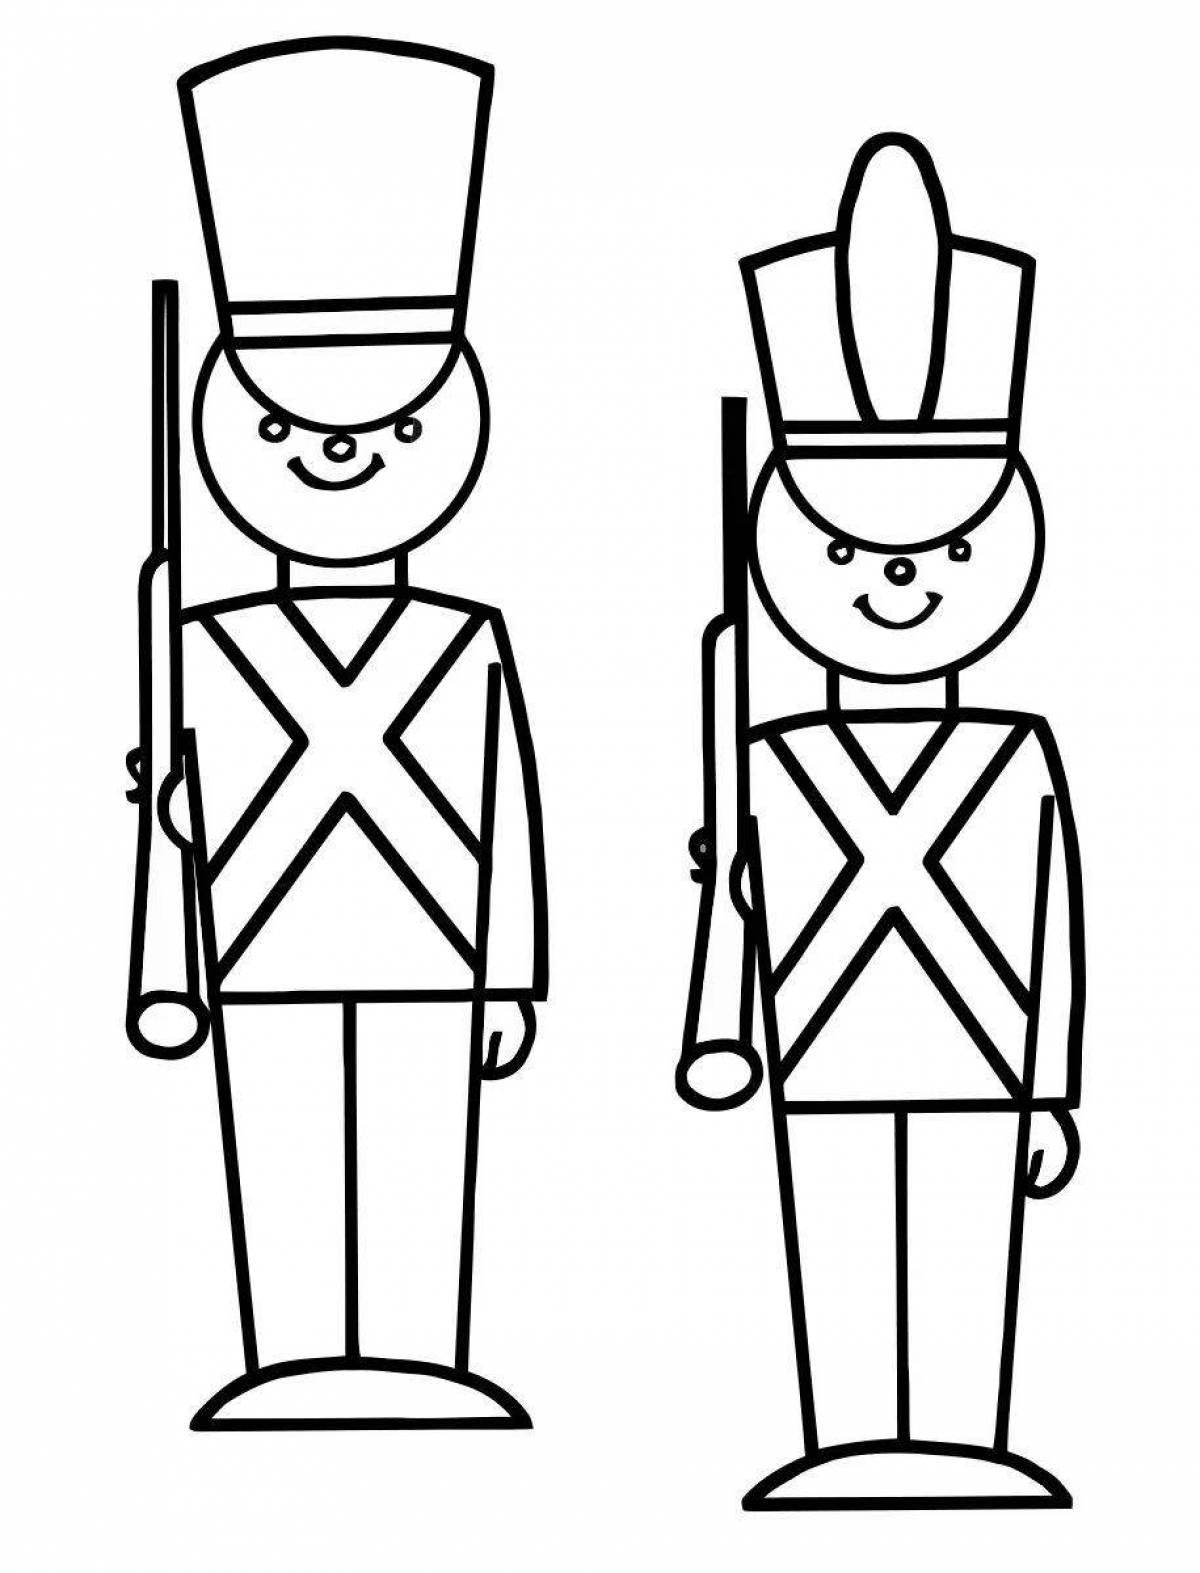 Coloring toy soldiers for boys